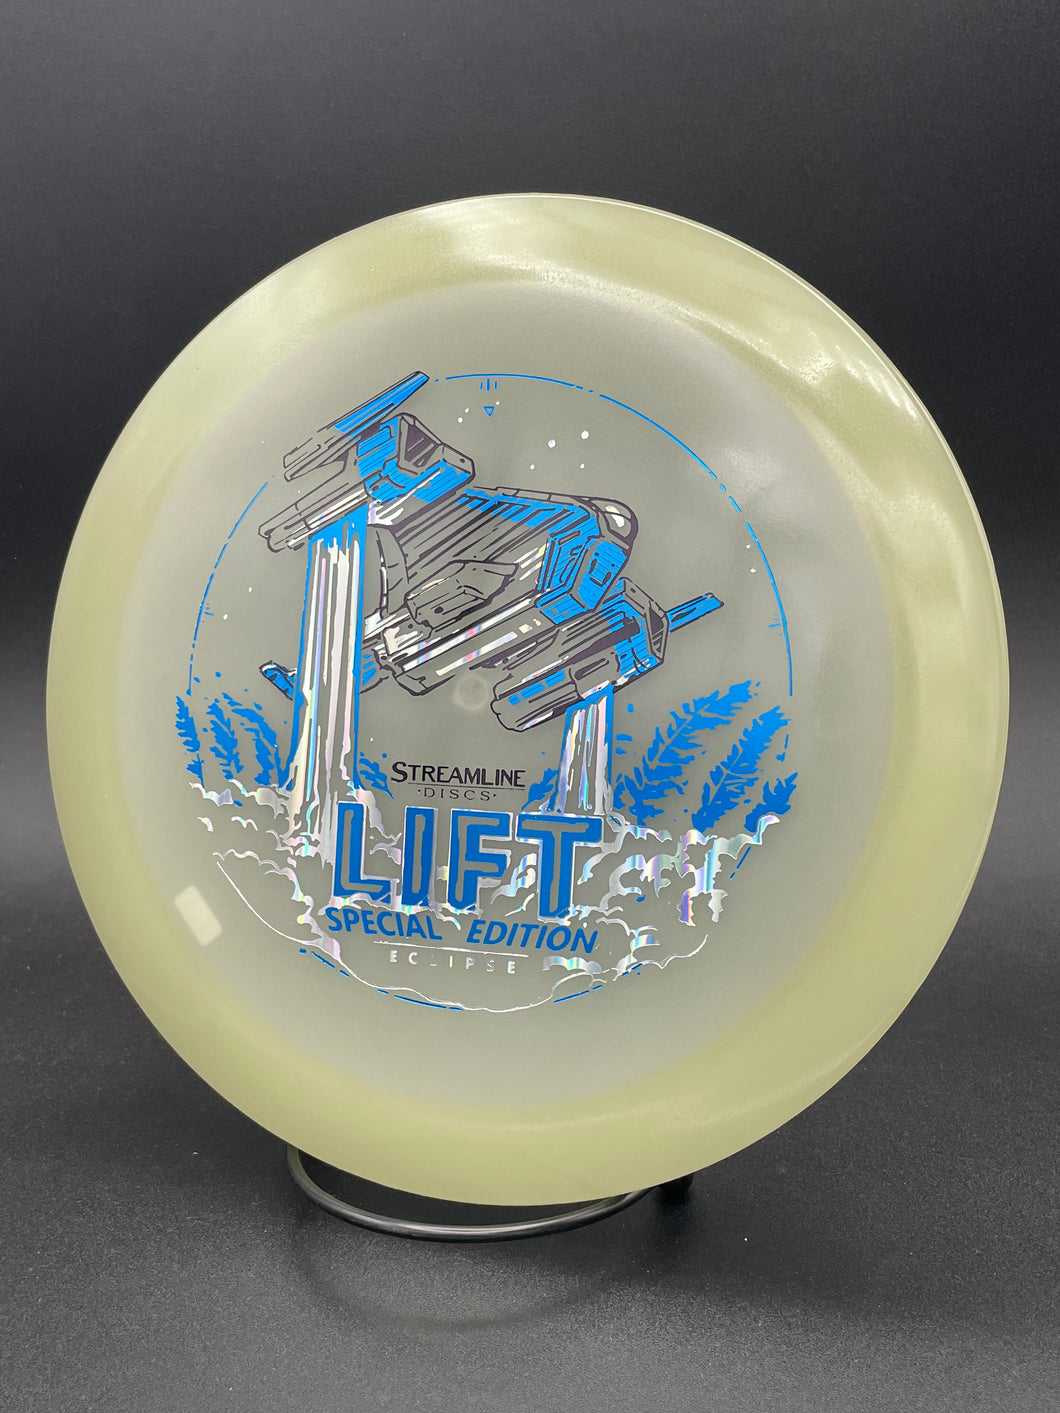 Lift / Streamline Discs / Eclipse 2.0 / Special Edition